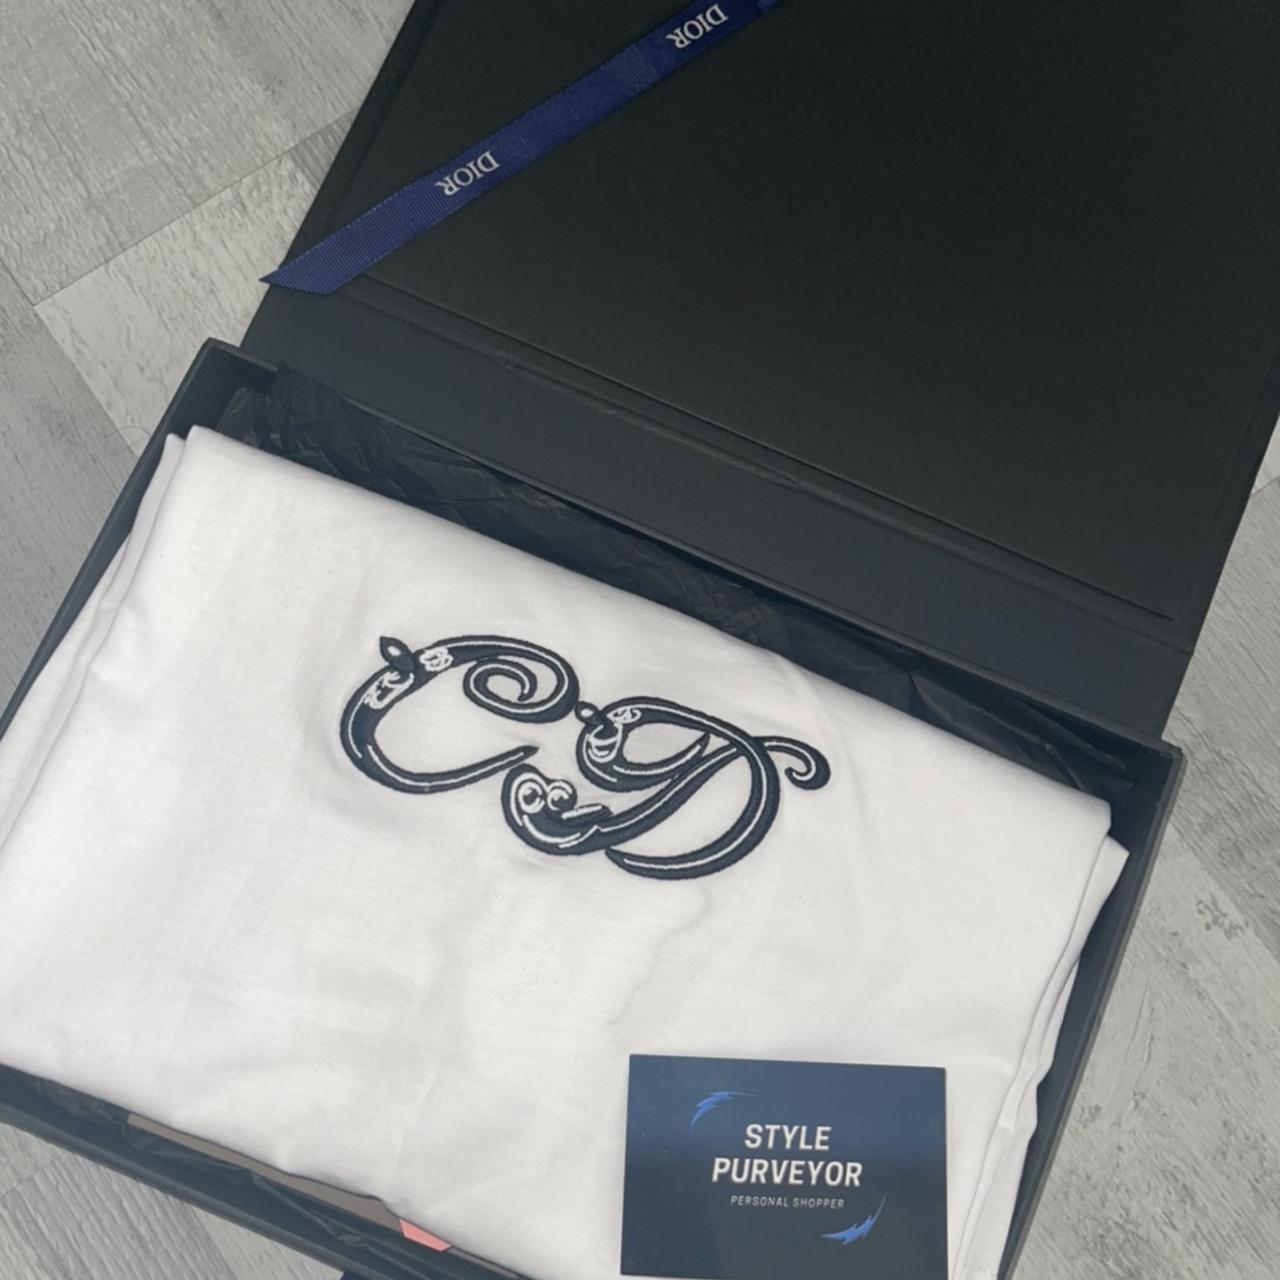 MENS DIOR T-SHIRT FRESH IN BOX AND PACKAGING - Depop